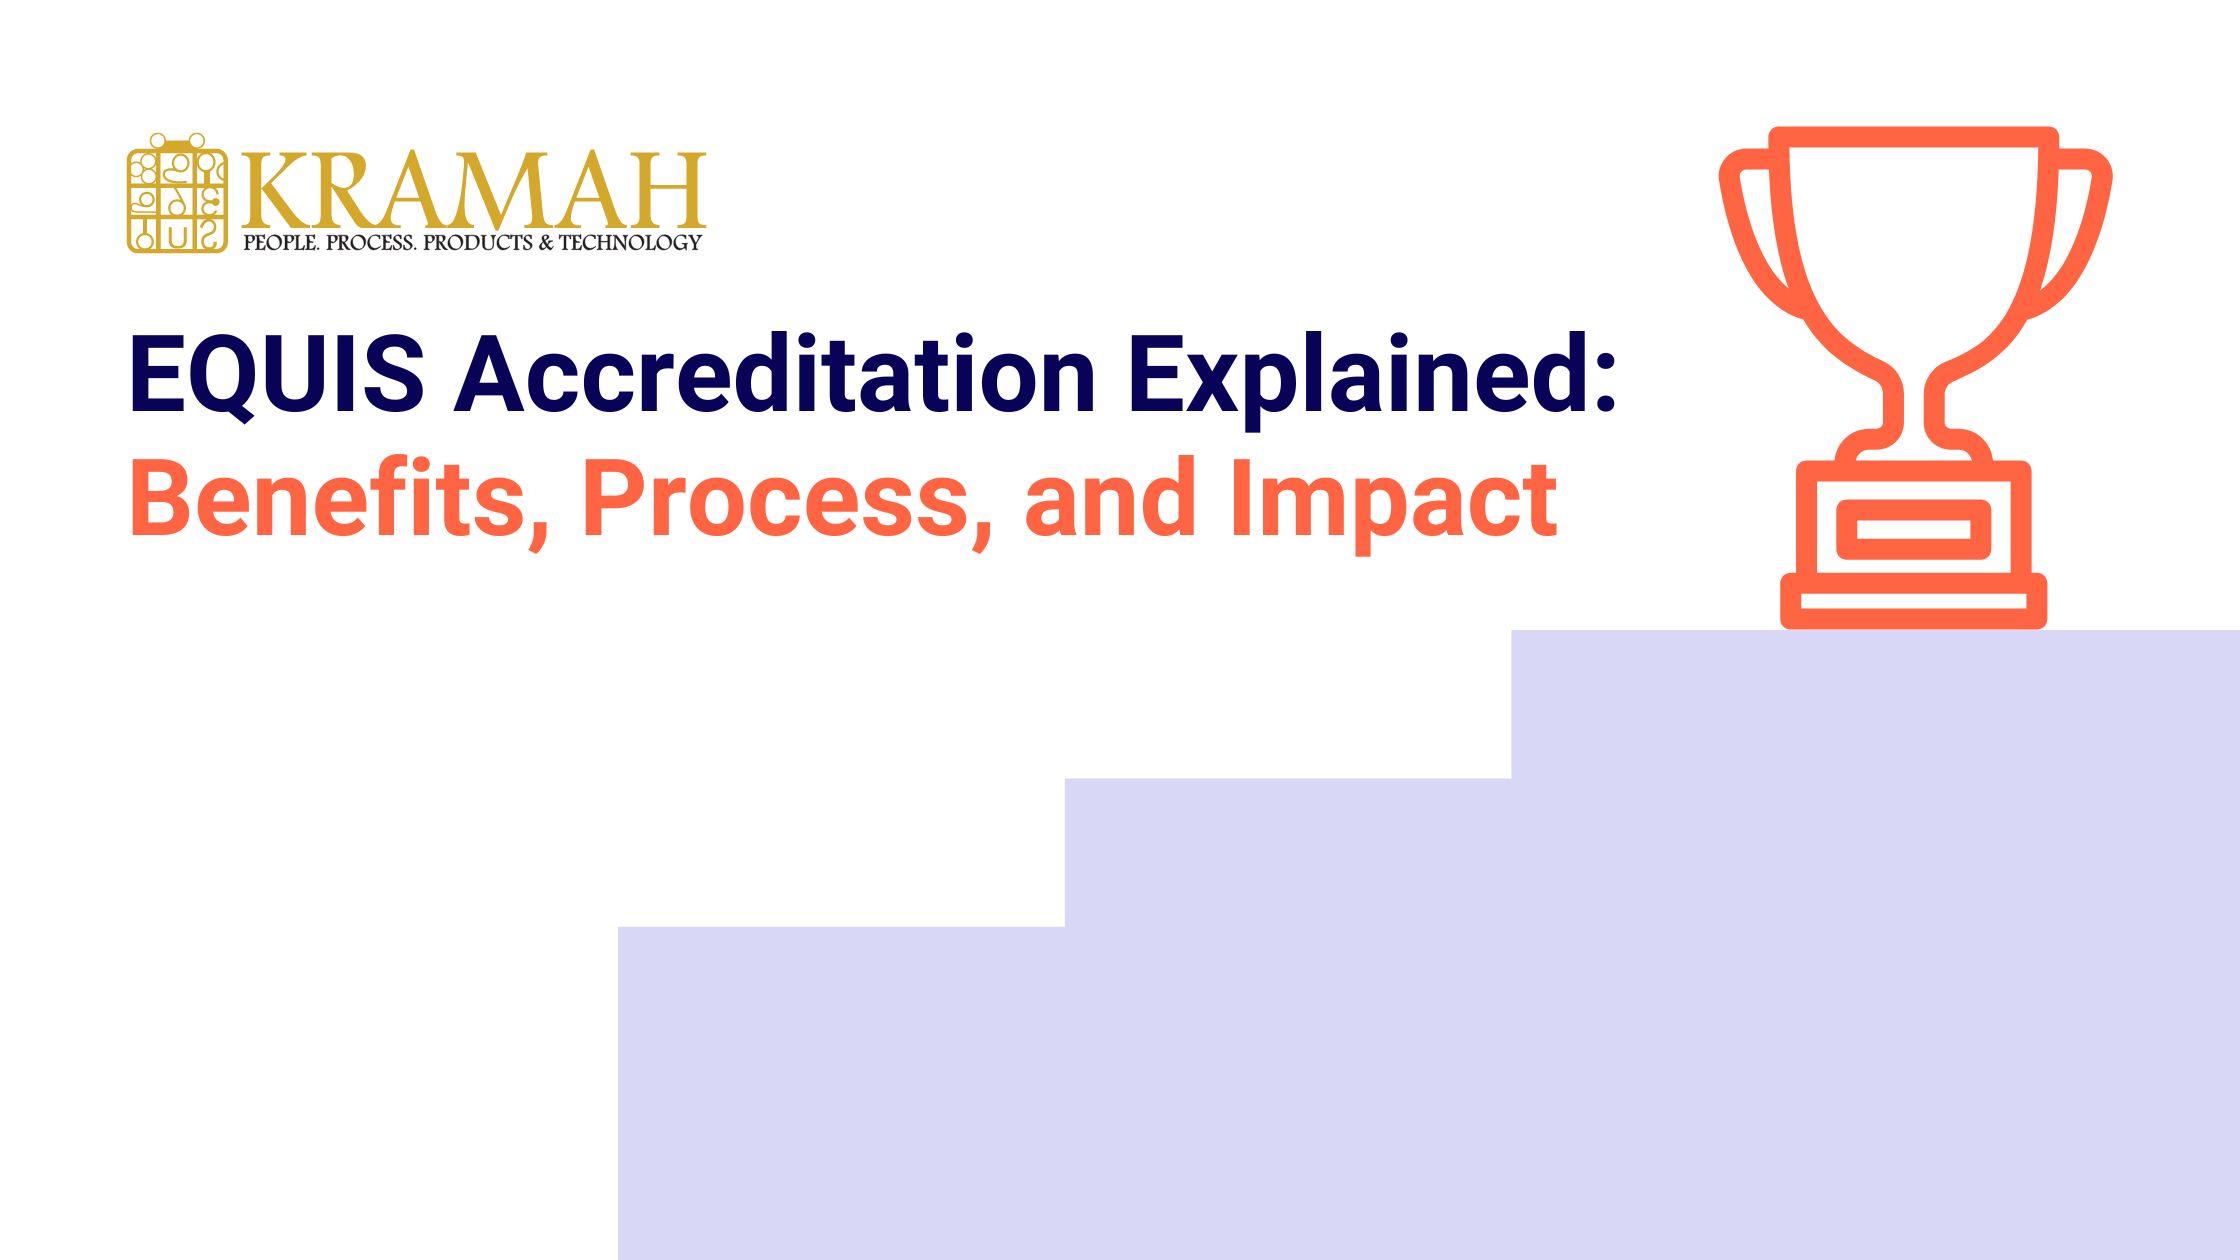 EQUIS Accreditation Explained Benefits, Process, and Impact